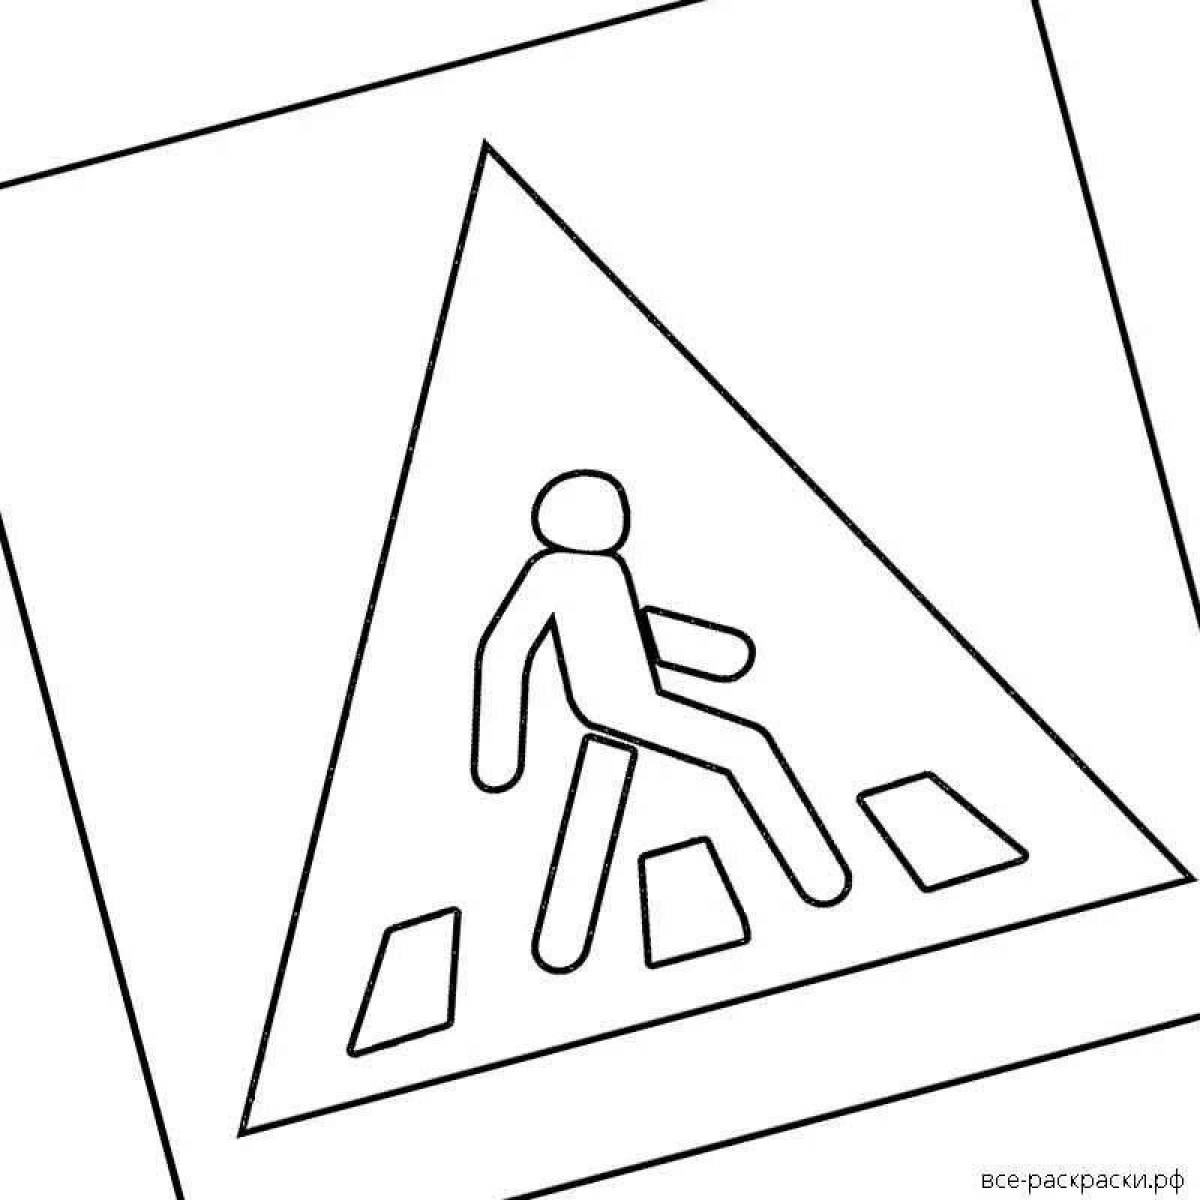 Entertaining coloring of the pedestrian crossing